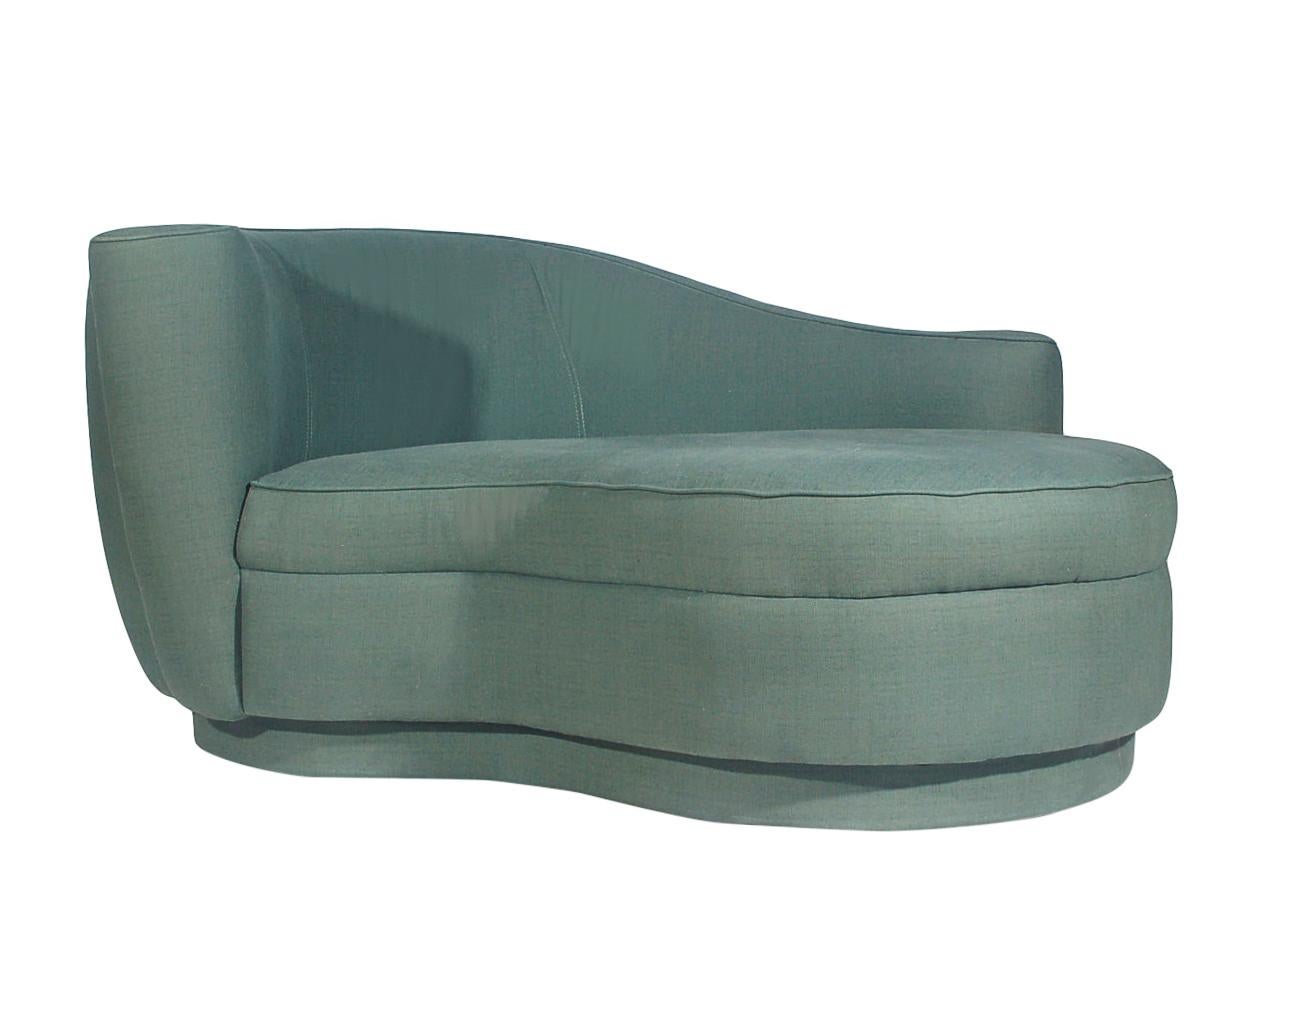 A sculptural chaise lounge in a cloud form circa 1980s. This piece features its original upholstery and it’s in very good overall condition. Ready for use.